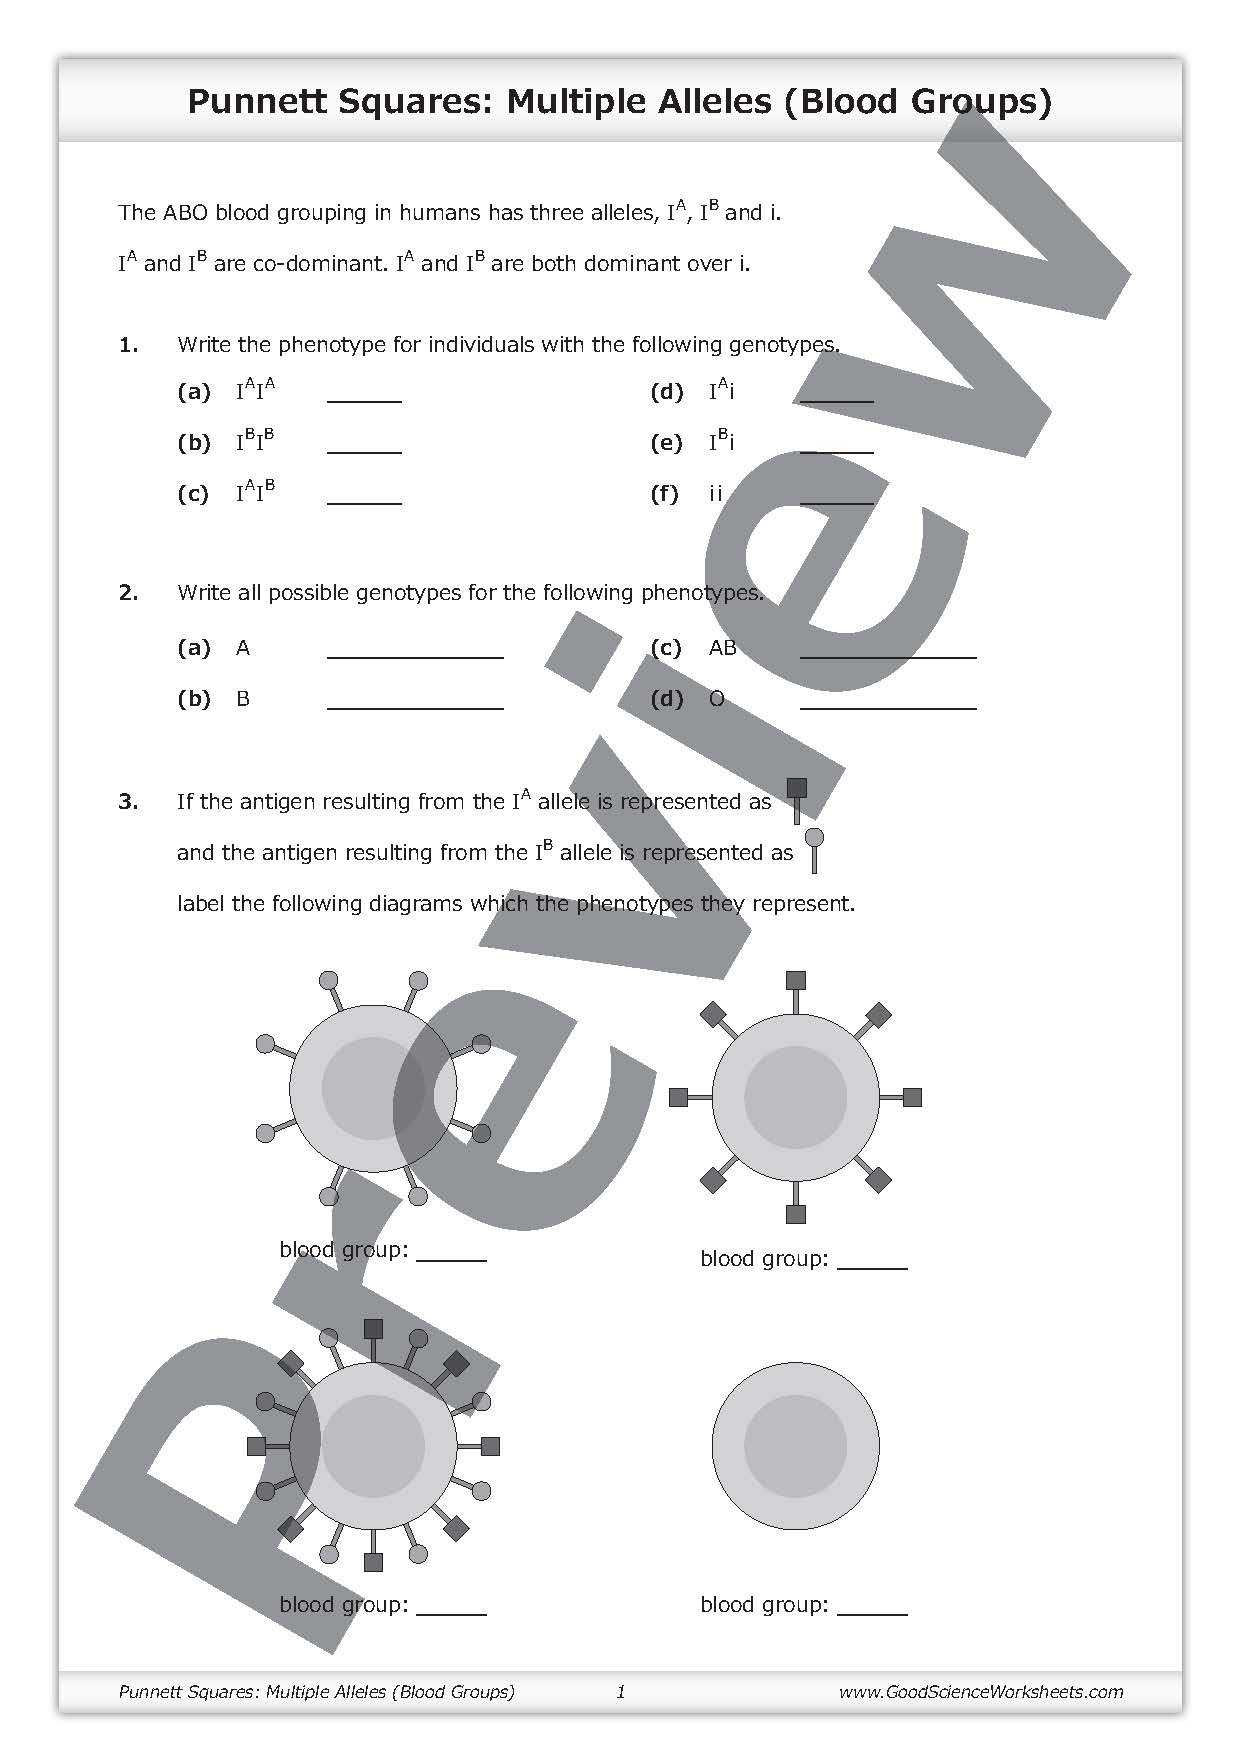 Codominance Incomplete Dominance Worksheet Answers with Multiple Alleleraits Worksheet Picture Hd Beyond Mendel Codominance